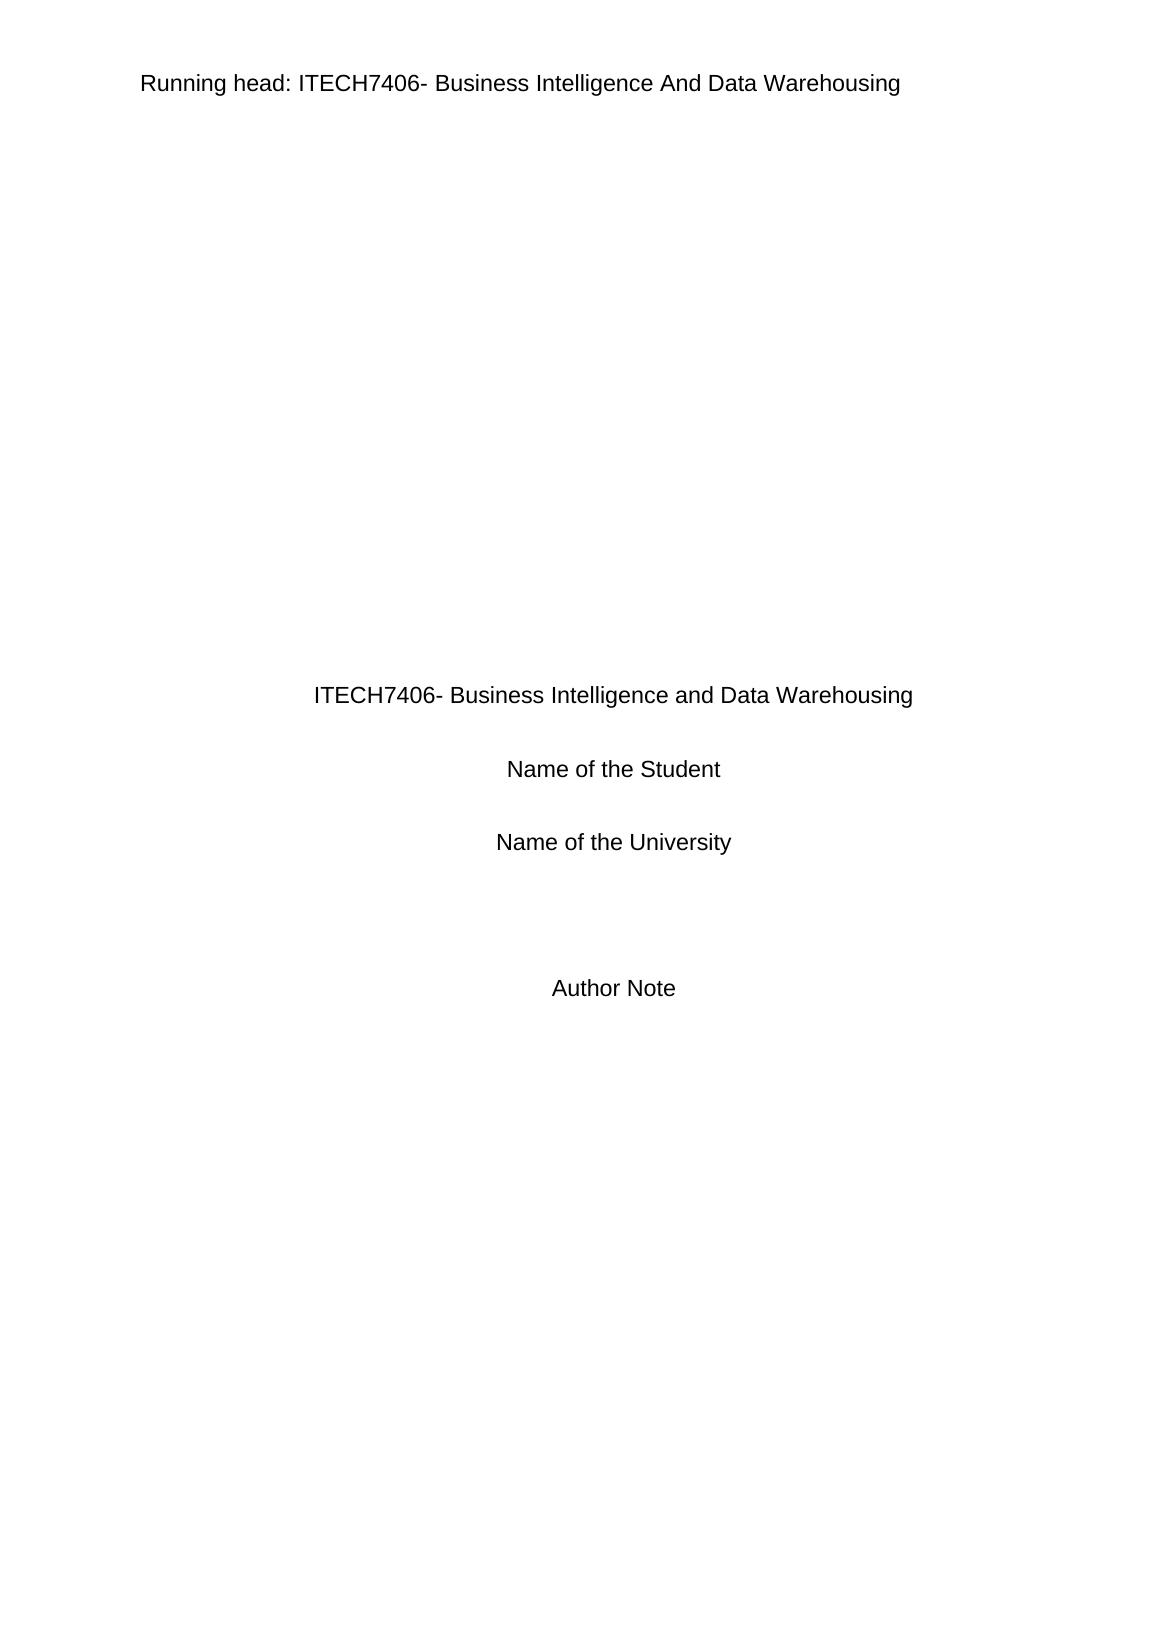 Business Intelligence And Data Warehousing Design and Compilation_1